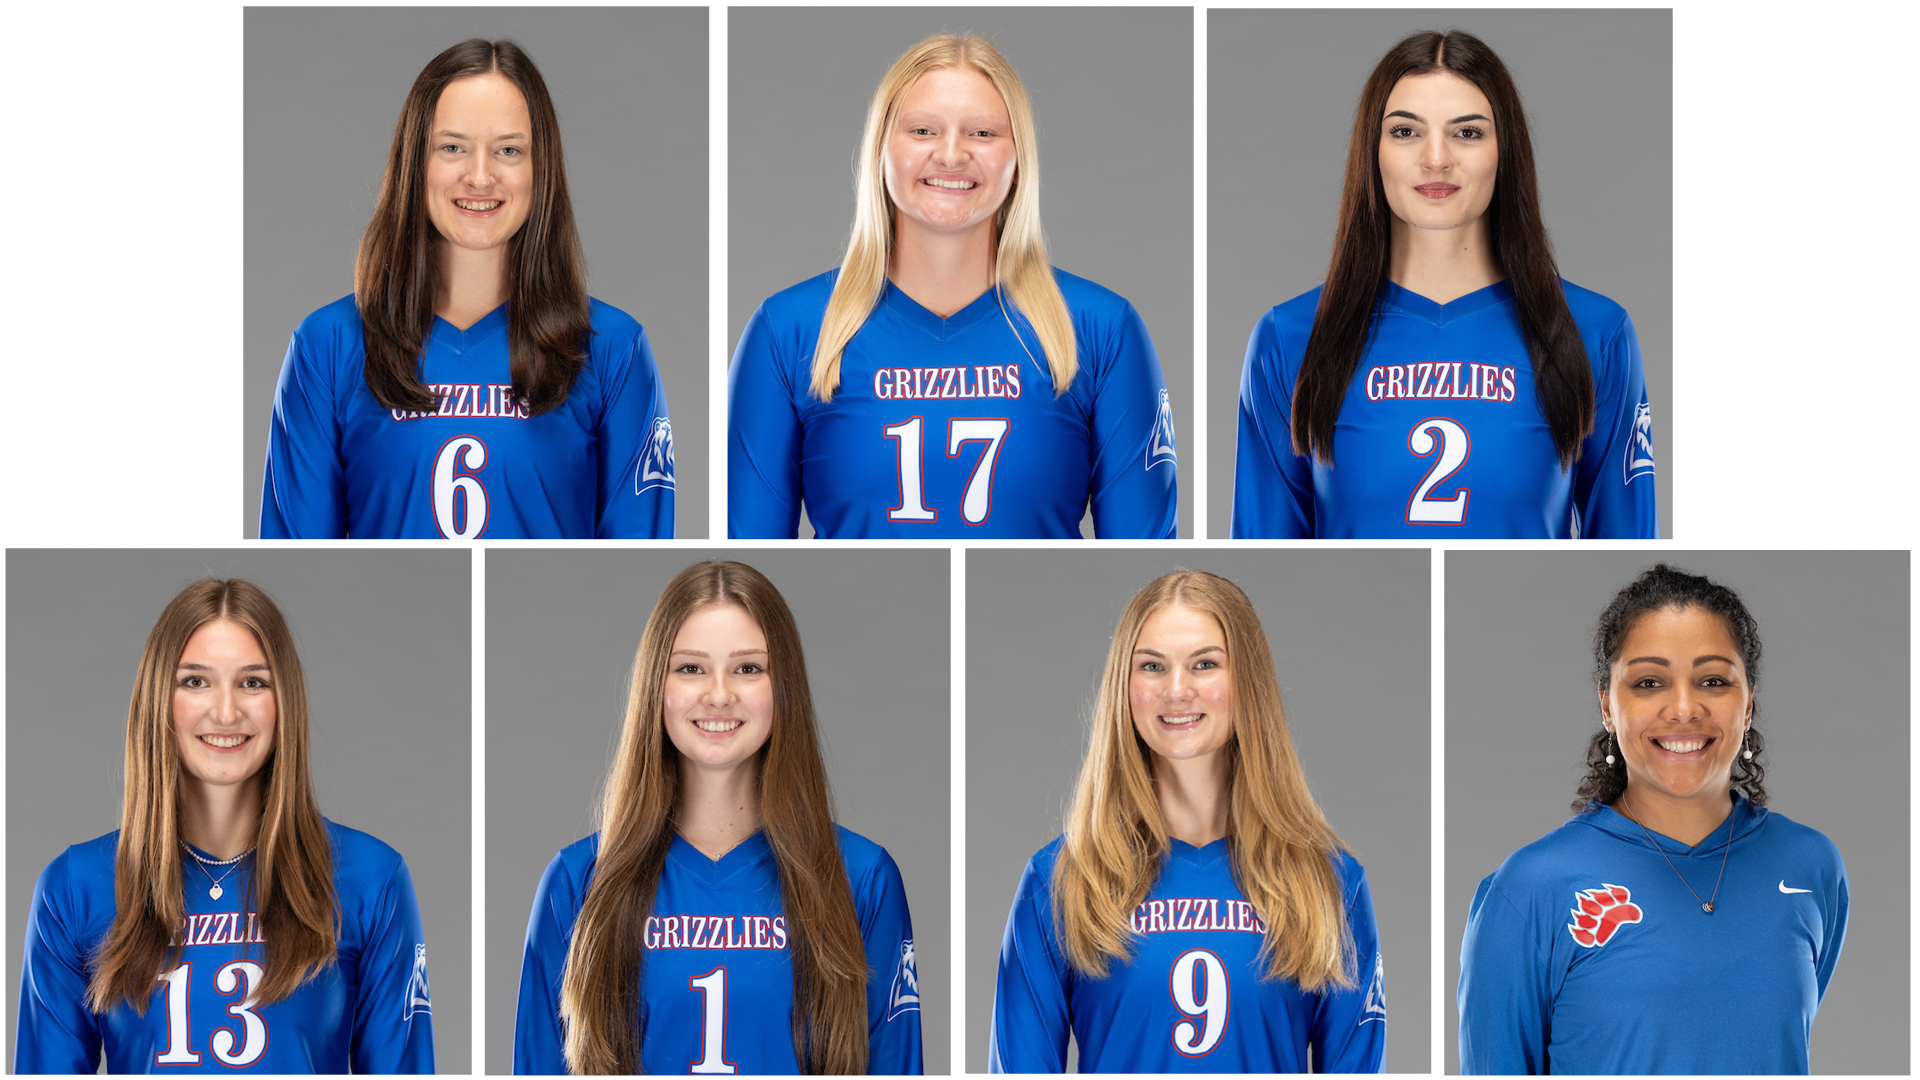 Members of the Grizzly Volleyball team earning postseason honors include, top row from left, Rosa Brençiç, Gibson Beckler and Maja Bochenek; bottom row from left, Caroline Glatkowski, Eduarda Portes, Kaitlyn Aleshire and head coach Paty Figueiredo. (MSU-WP Photos)